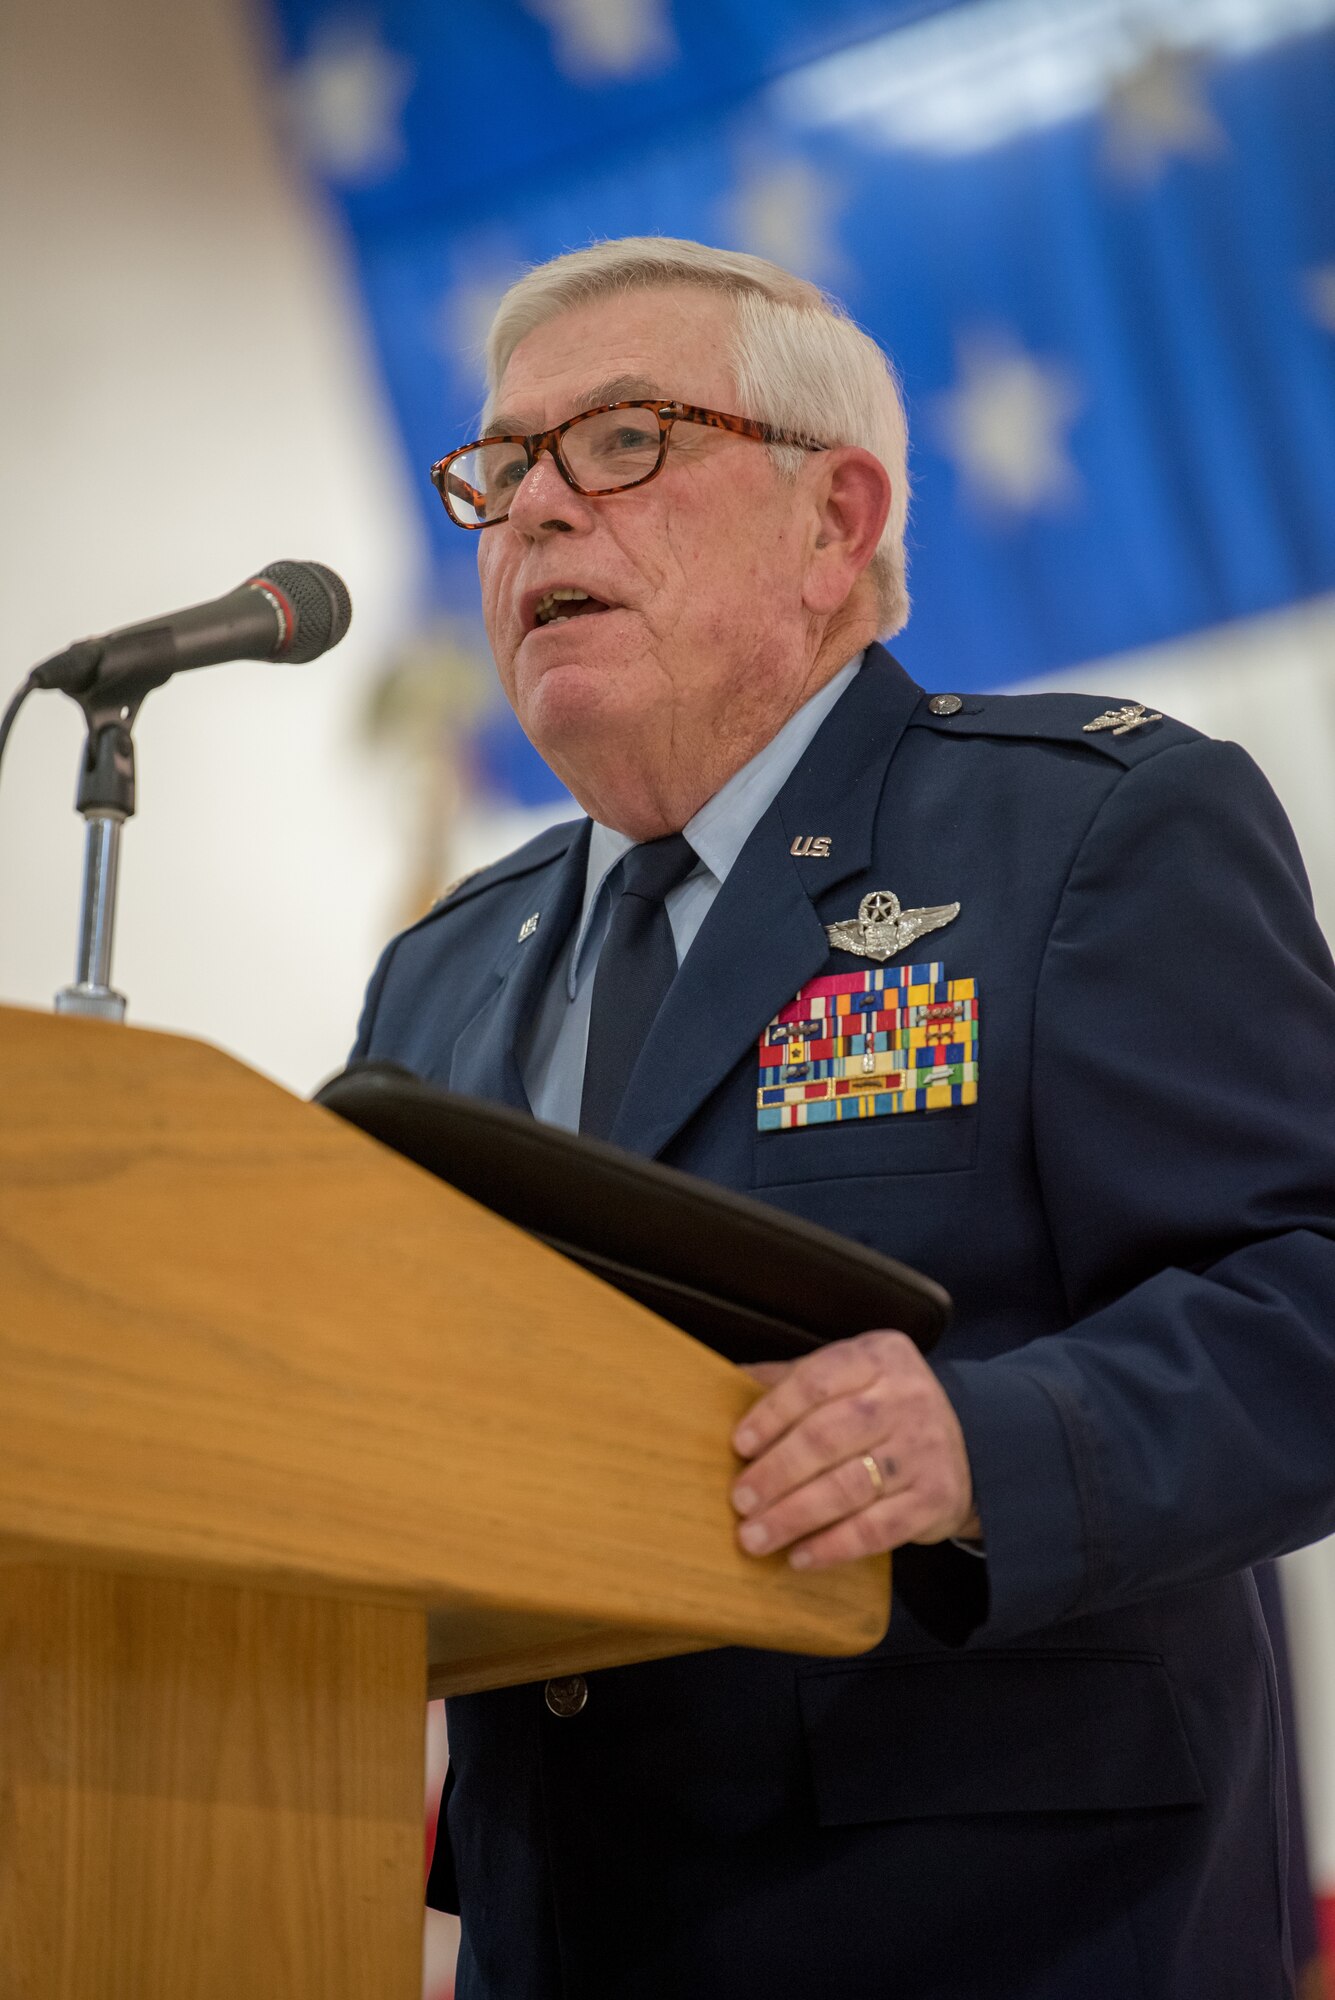 Retired Col. Michael Harden, former commander of the 123rd Airlift Wing, speaks at a retirement ceremony for Col. Ken Dale at the Kentucky Air National Guard Base in Louisville, Ky., on Dec. 1, 2018. Dale, outgoing commander of the 123rd Maintenance Group, served the Kentucky Air National Guard for 38 years. (U.S. Air National Guard photo by Staff Sgt. Joshua Horton)